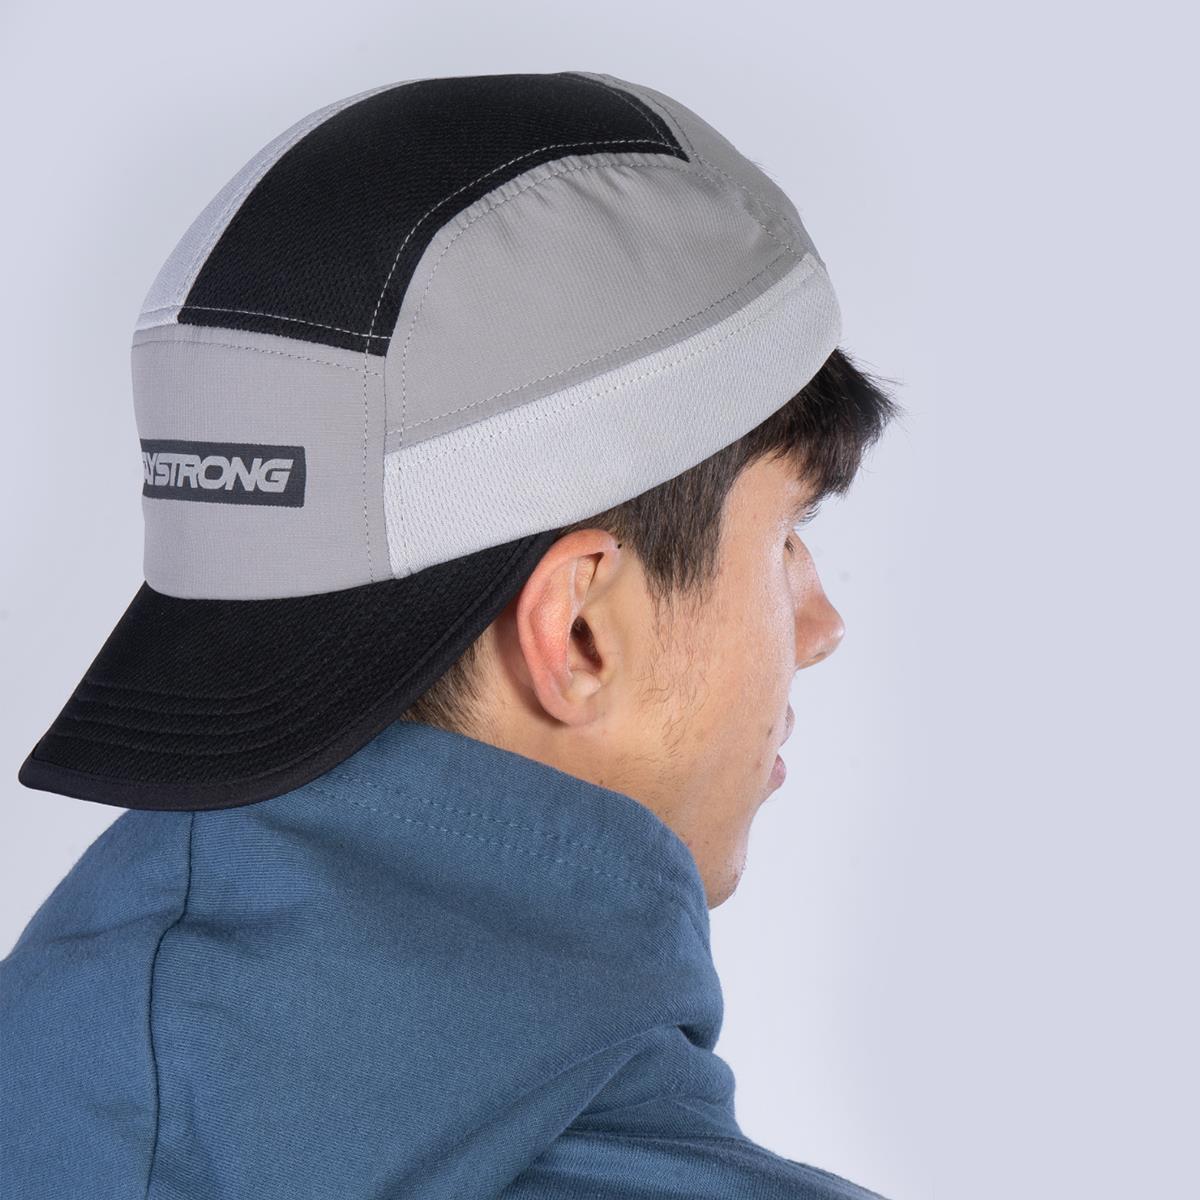 Stay Strong Faster 6 Panel Cap - Grey